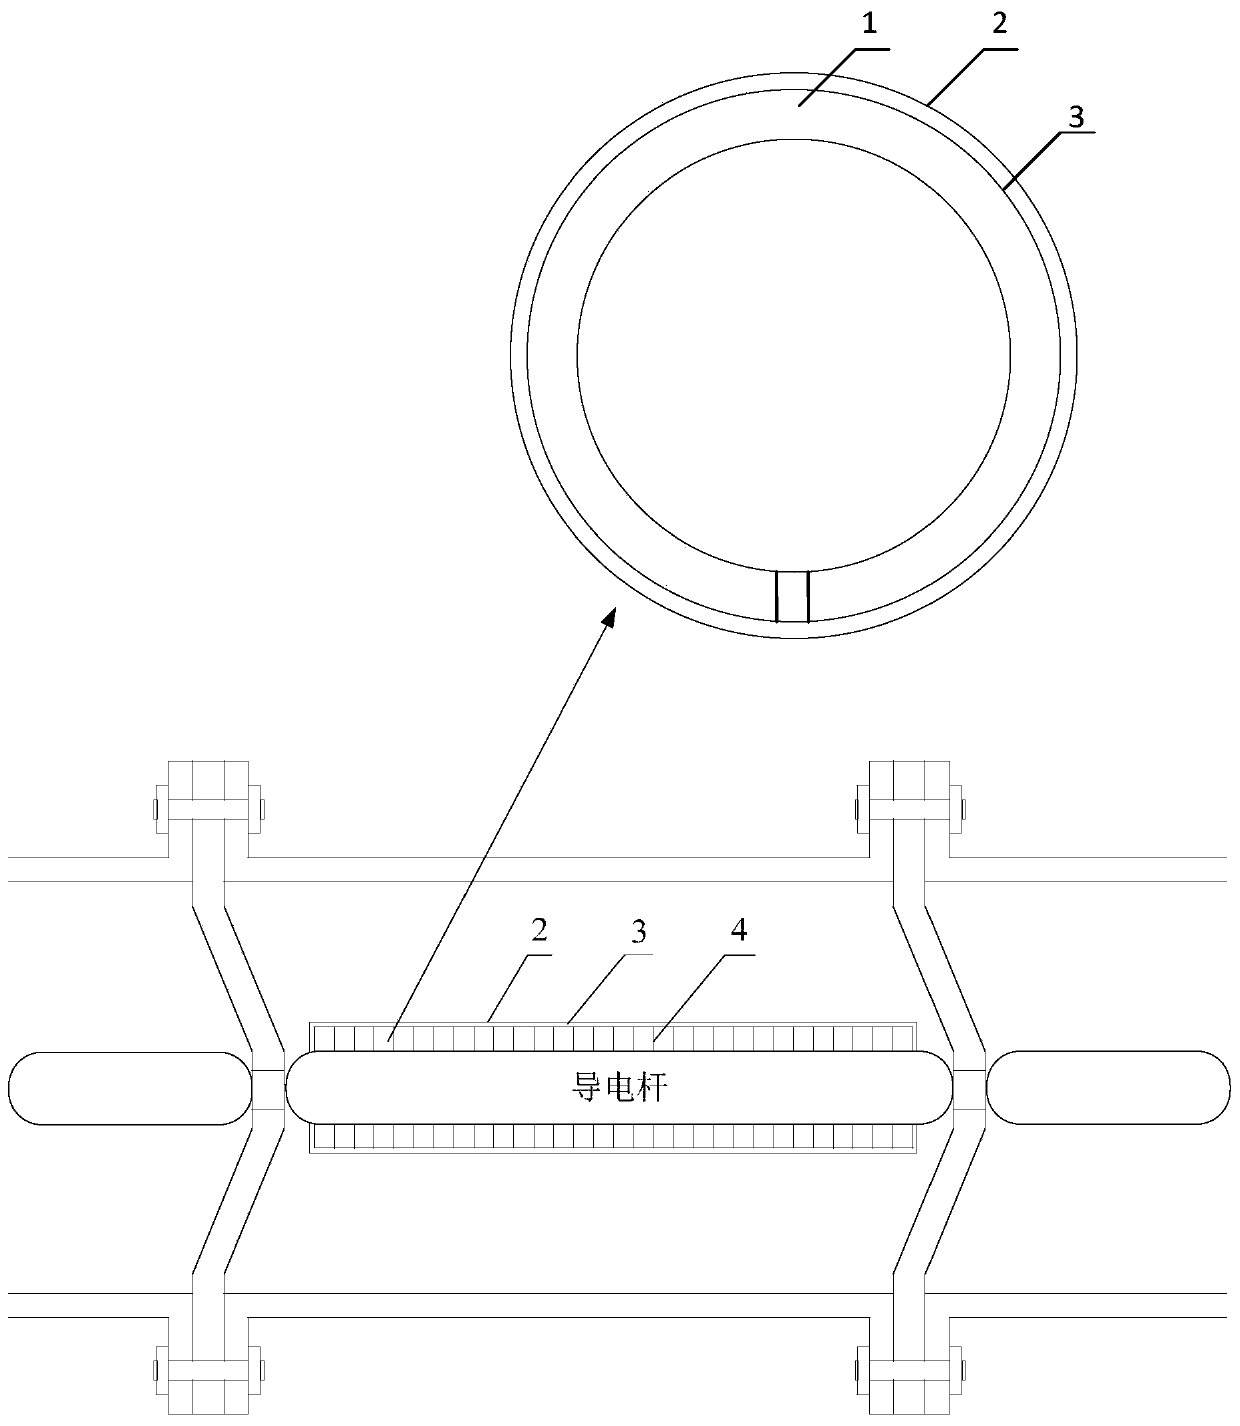 Magnetic ring device for suppressing very fast transient overvoltage in gas-insulated switchgear